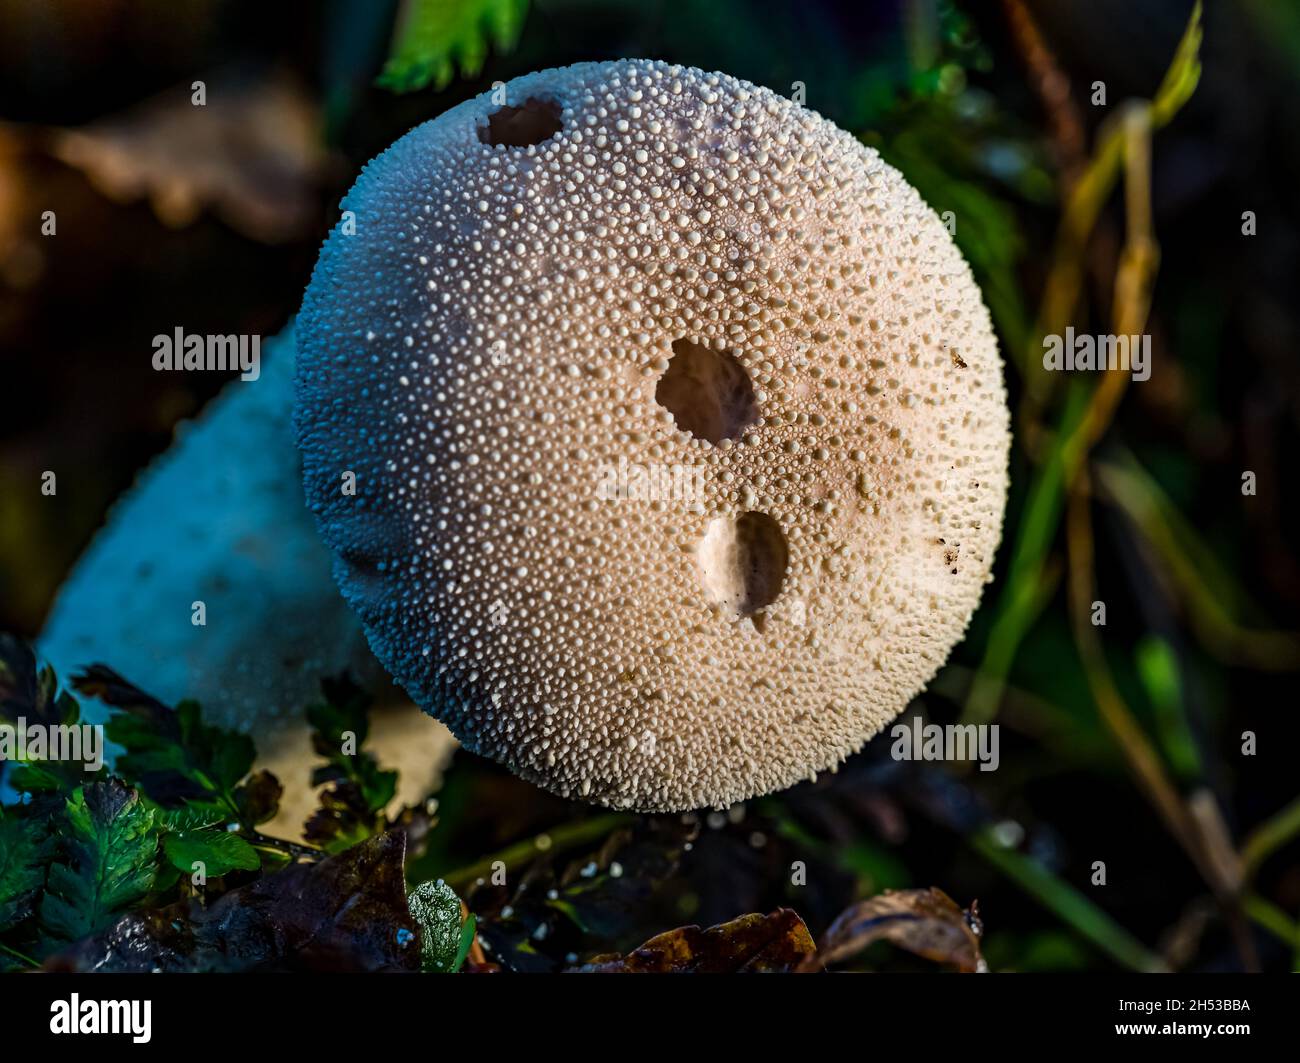 Common puffball fungus (Lycoperdon perlatum) with holes from blowing out spores, on woodland ground, Scotland, Uk Stock Photo